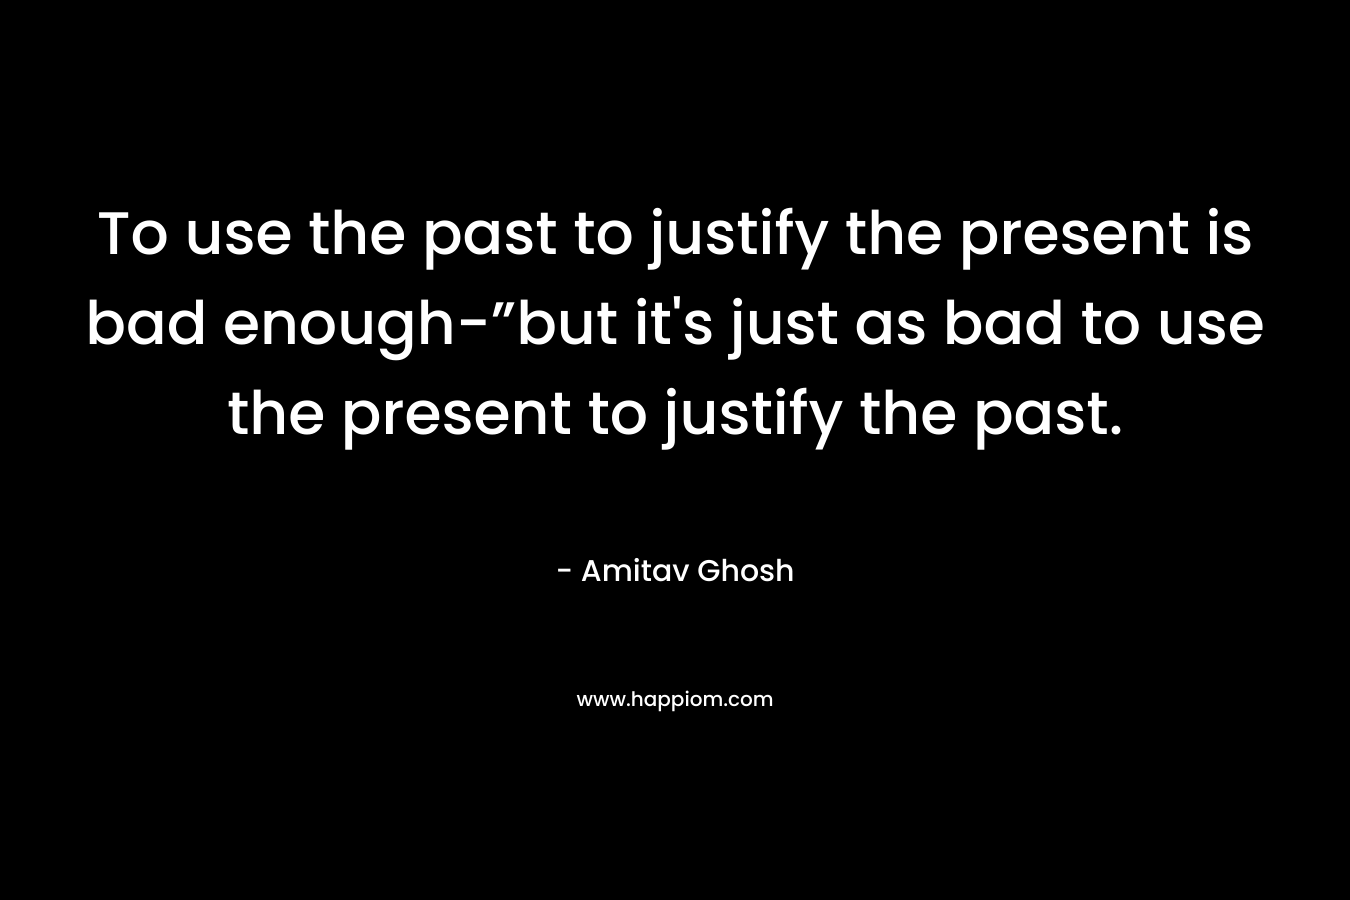 To use the past to justify the present is bad enough-”but it's just as bad to use the present to justify the past.